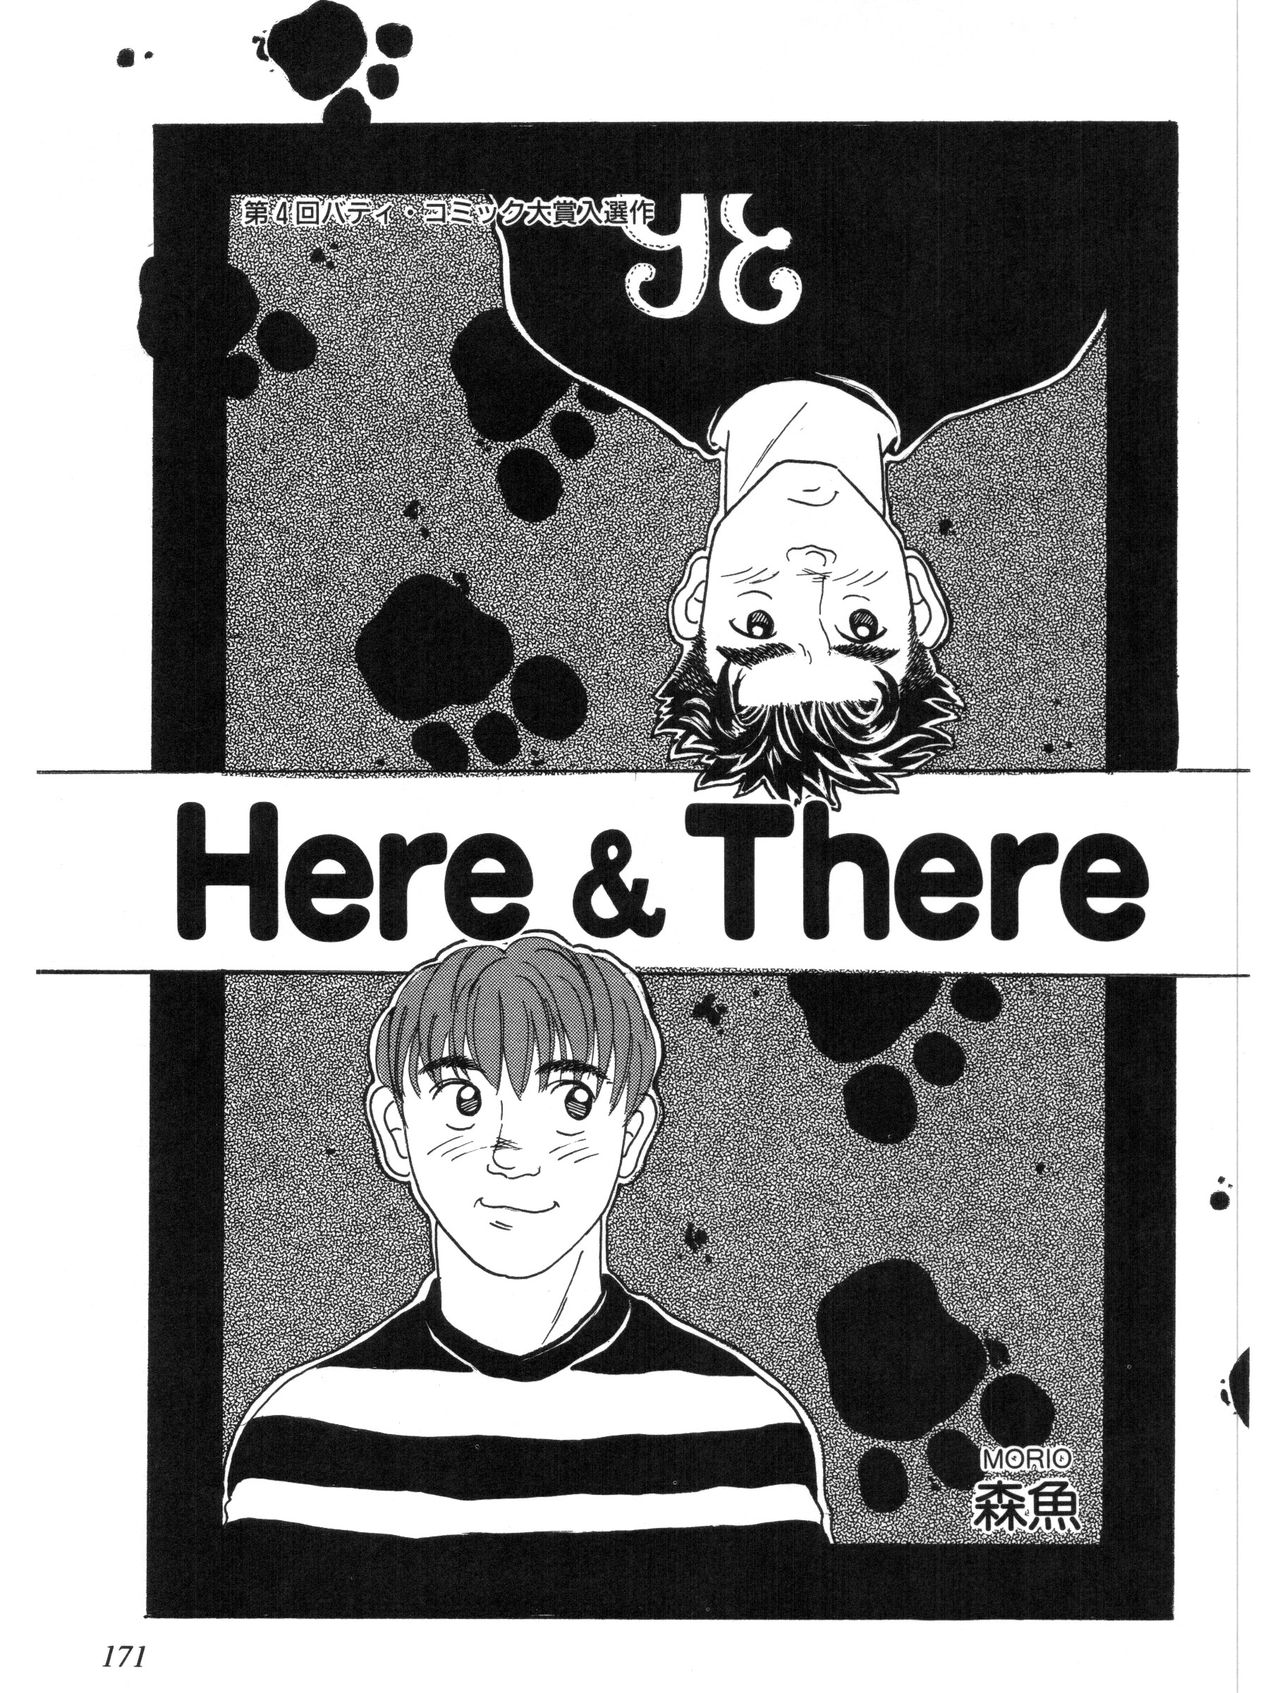 [Morio] Here＆There [森魚] Here＆There